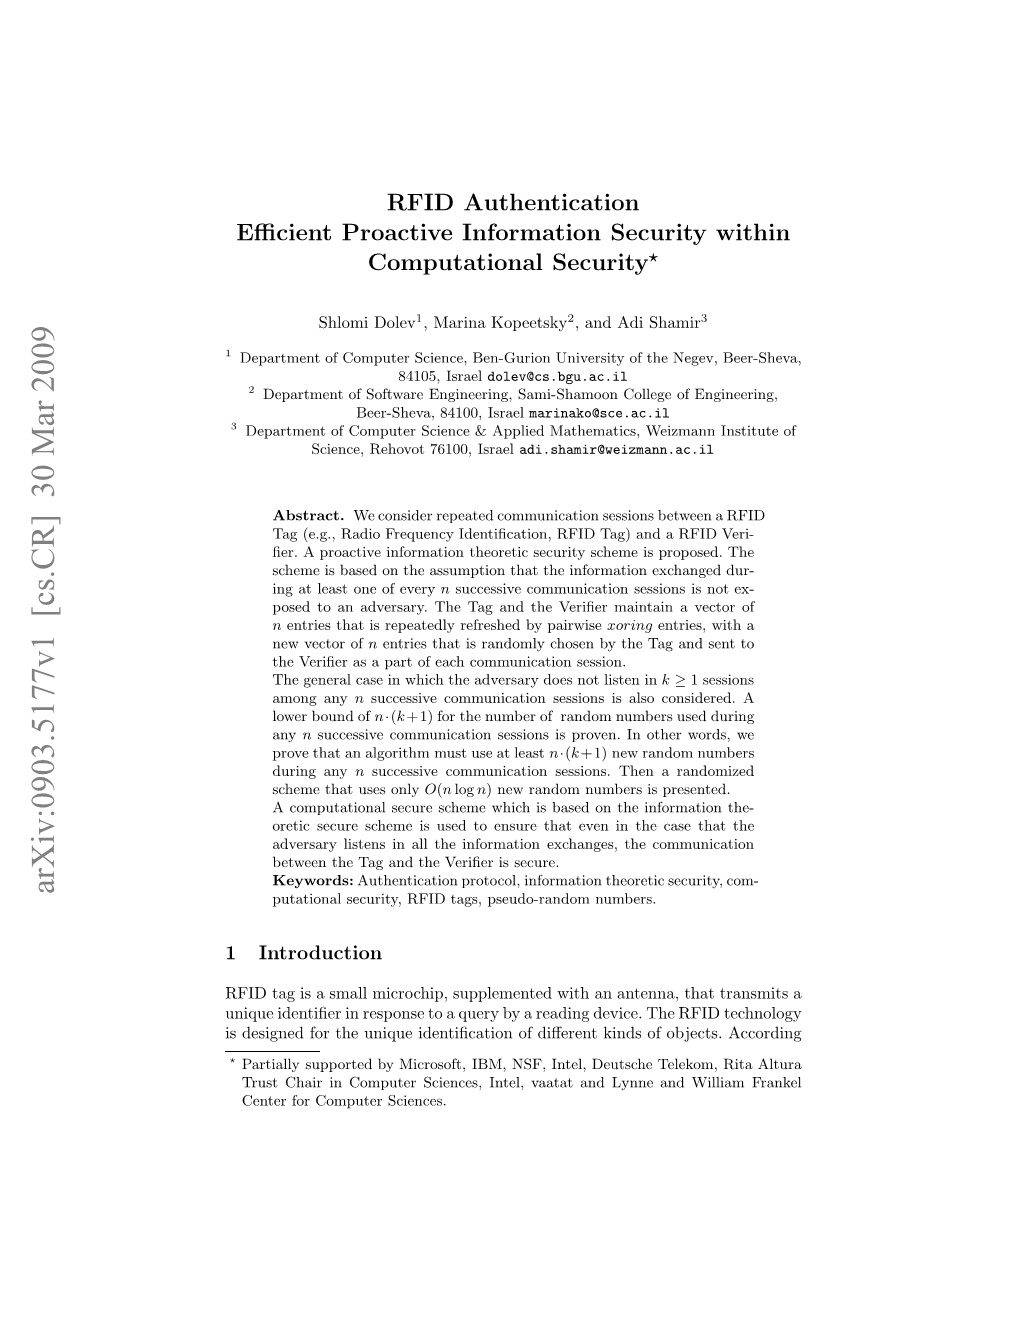 RFID Authentication, Efficient Proactive Information Security